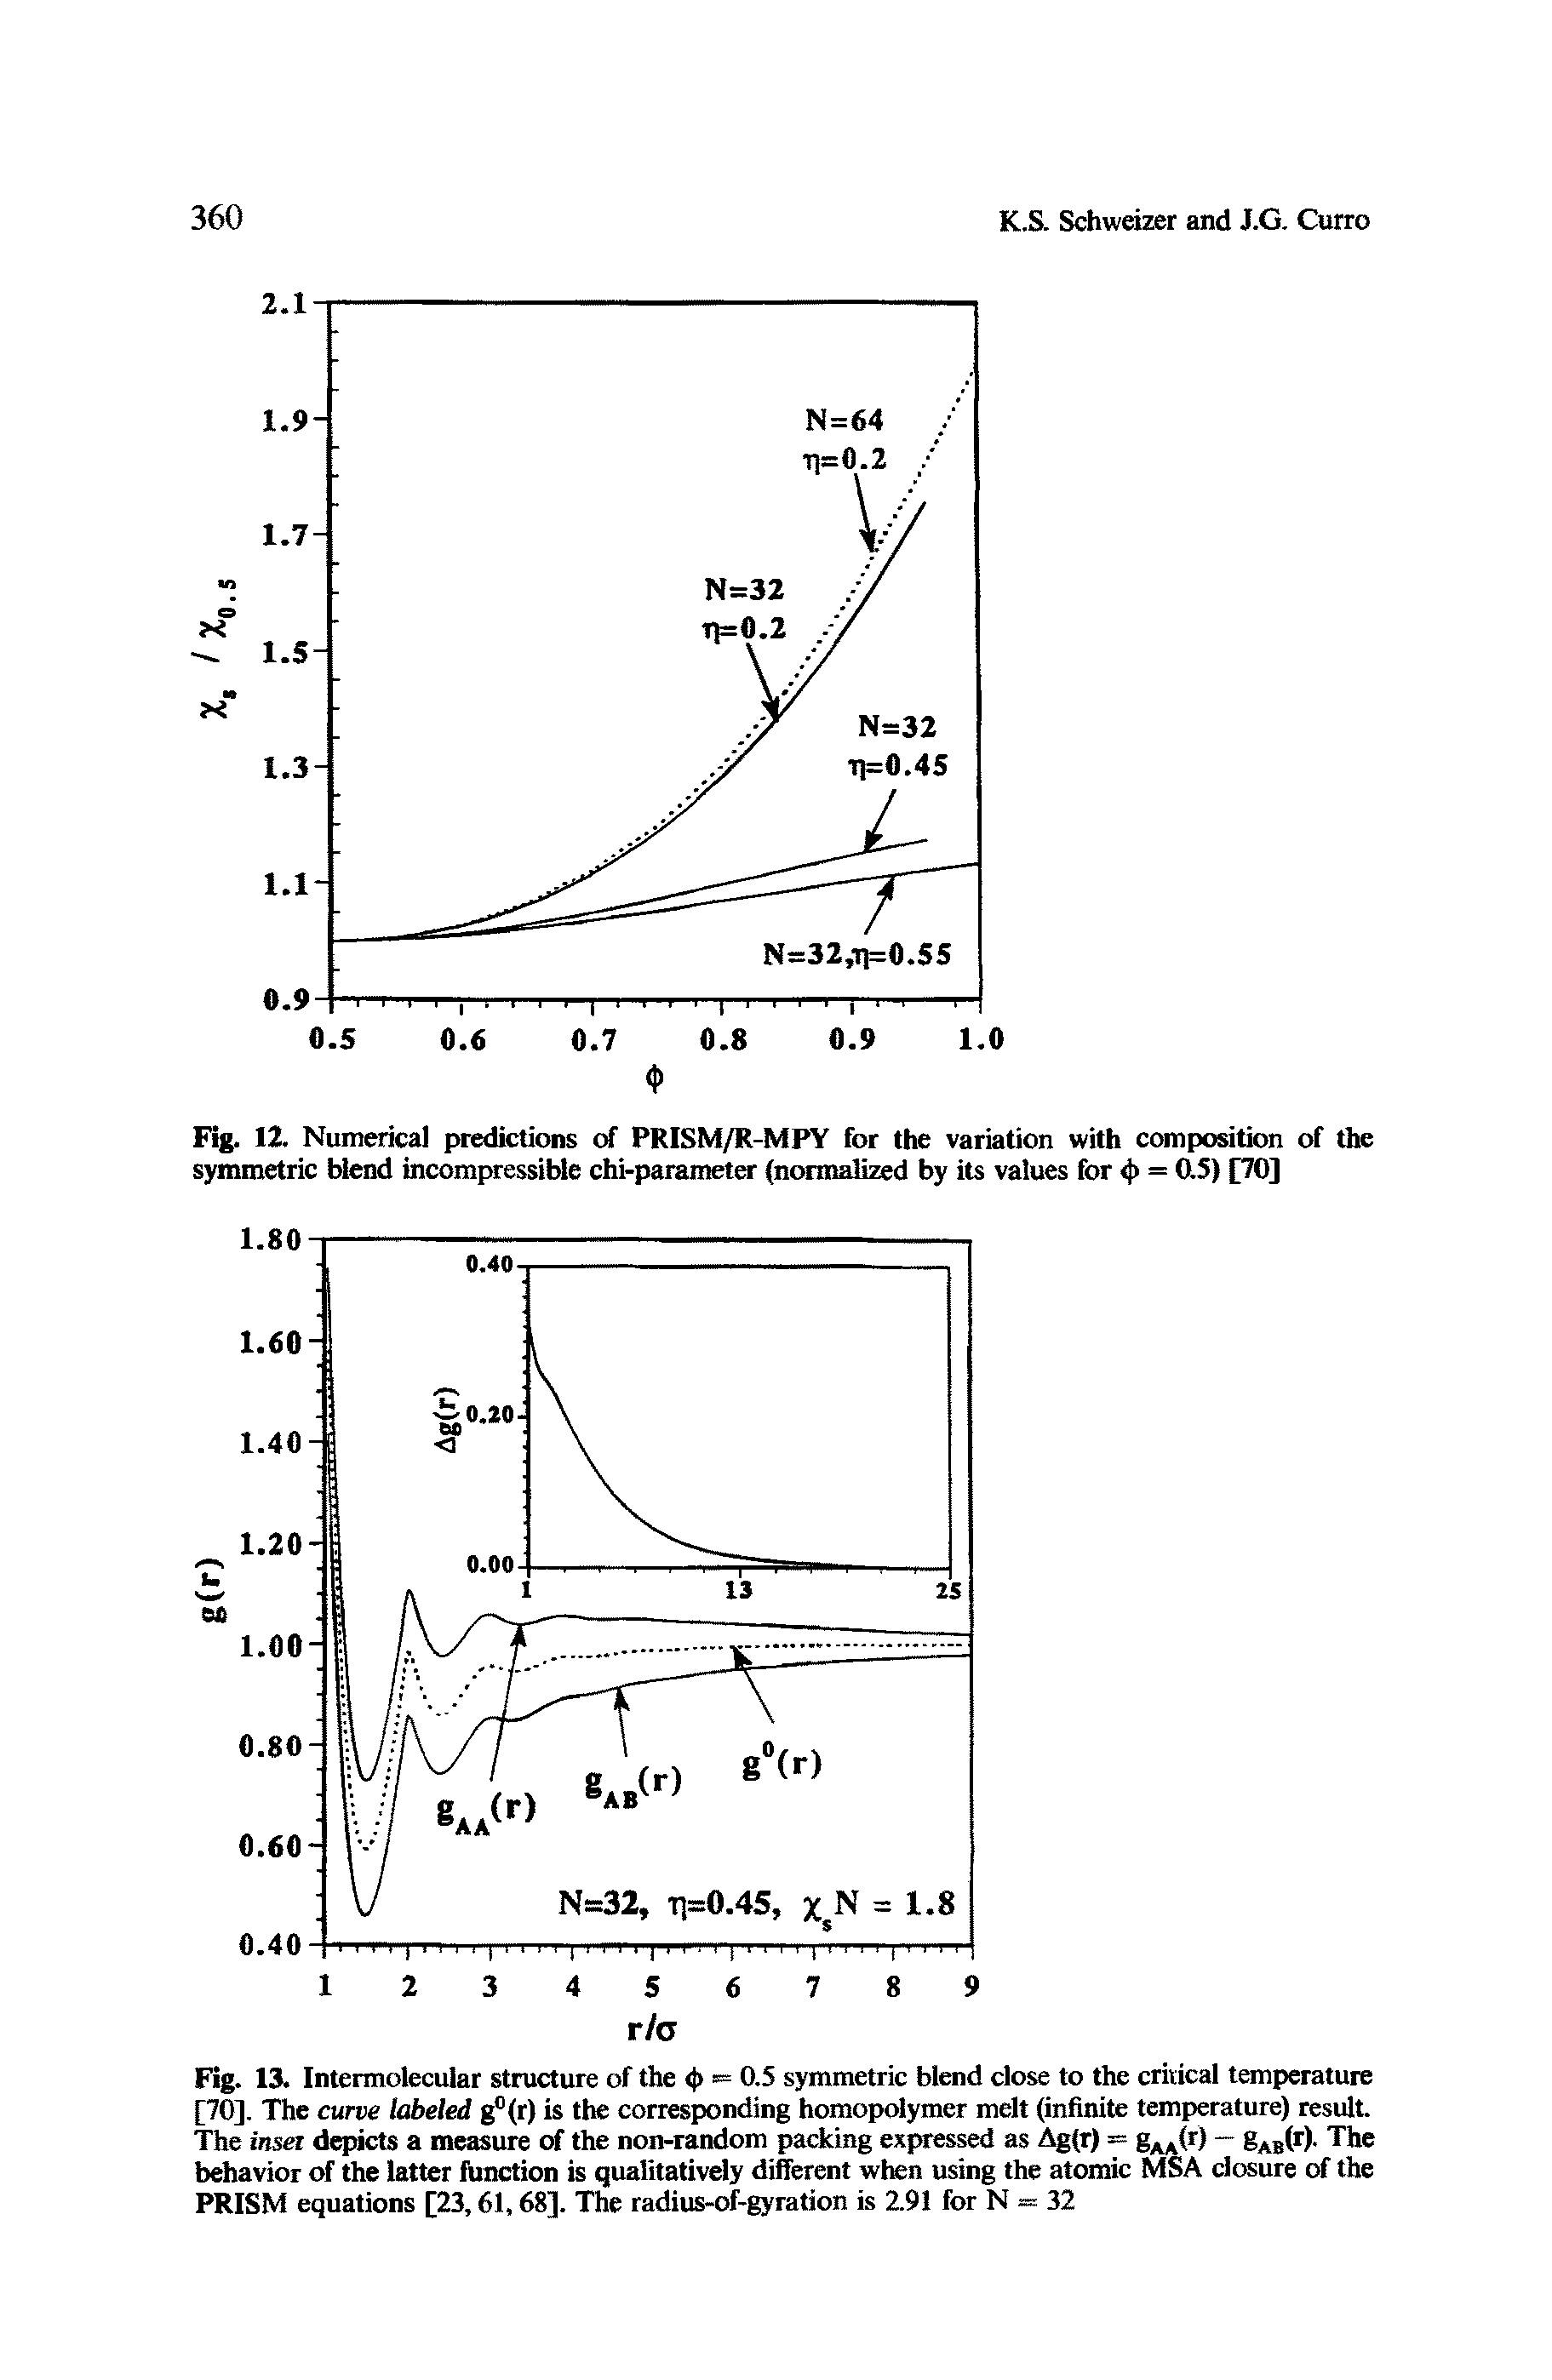 Fig. 13. Intermolecular structure of the < > = 0.5 symmetric blend close to the critical temperature [70]. The curve labeled g (r) is the corresponding homopolymer melt (infinite temperature) result The inset depicts a measure of the non-random packing expressed as Ag(r) = SaaW 8abW- The behavior of the latter ftinction is qualitatively different wten using the atomic MSA closure of the PRISM equations [23,61,68]. The radius-of-gyration is 2.91 for N = 32...